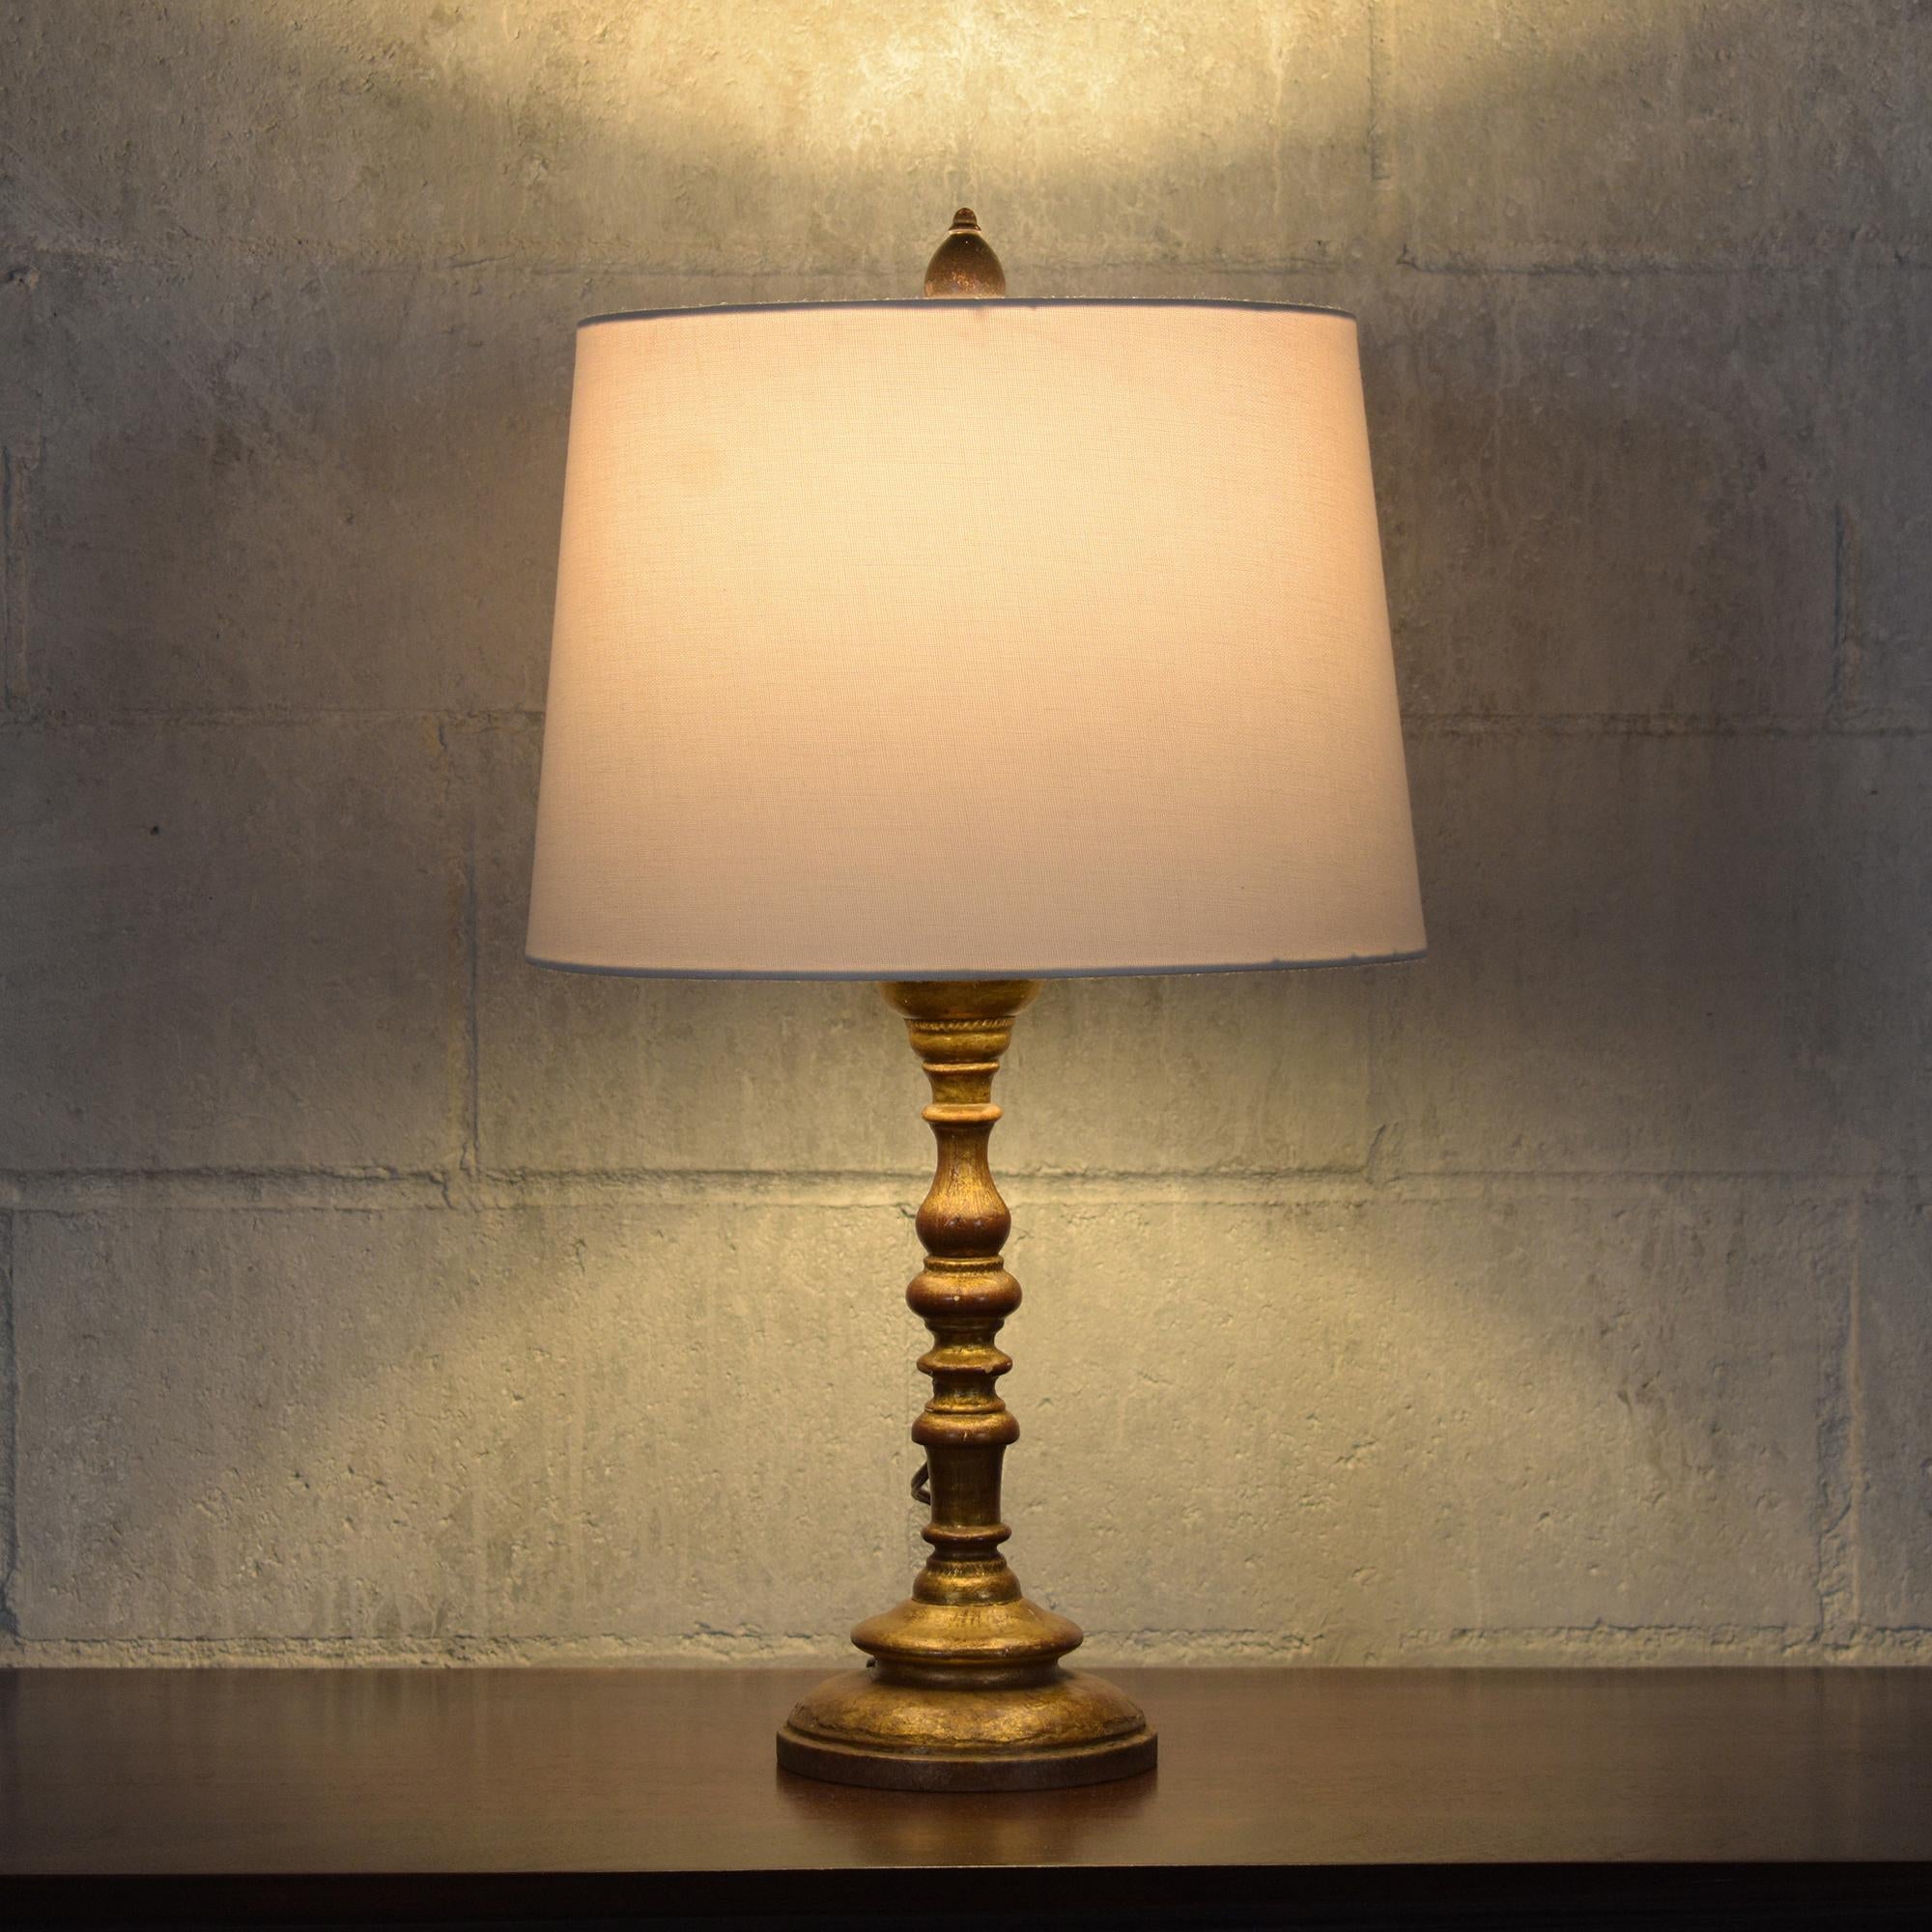 Neoclassical 19th-Century Hand-Crafted Giltwood Table Lamp with New Off-White Shade